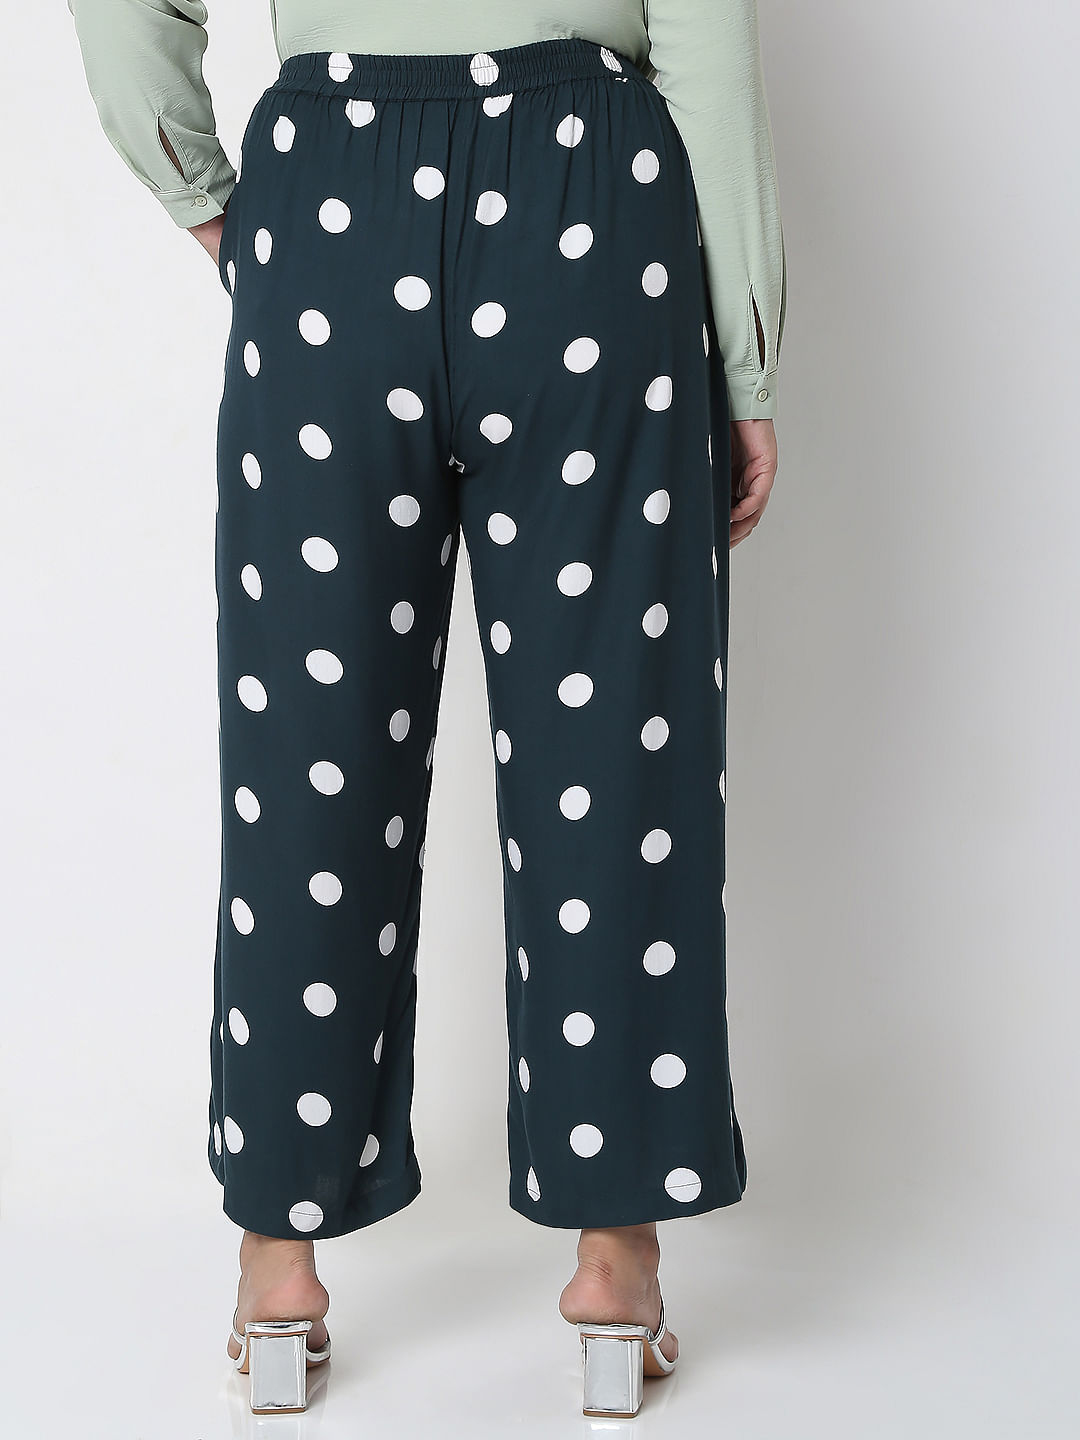 Orange Polka Dot High Waisted Wide Leg Trousers  In The Style